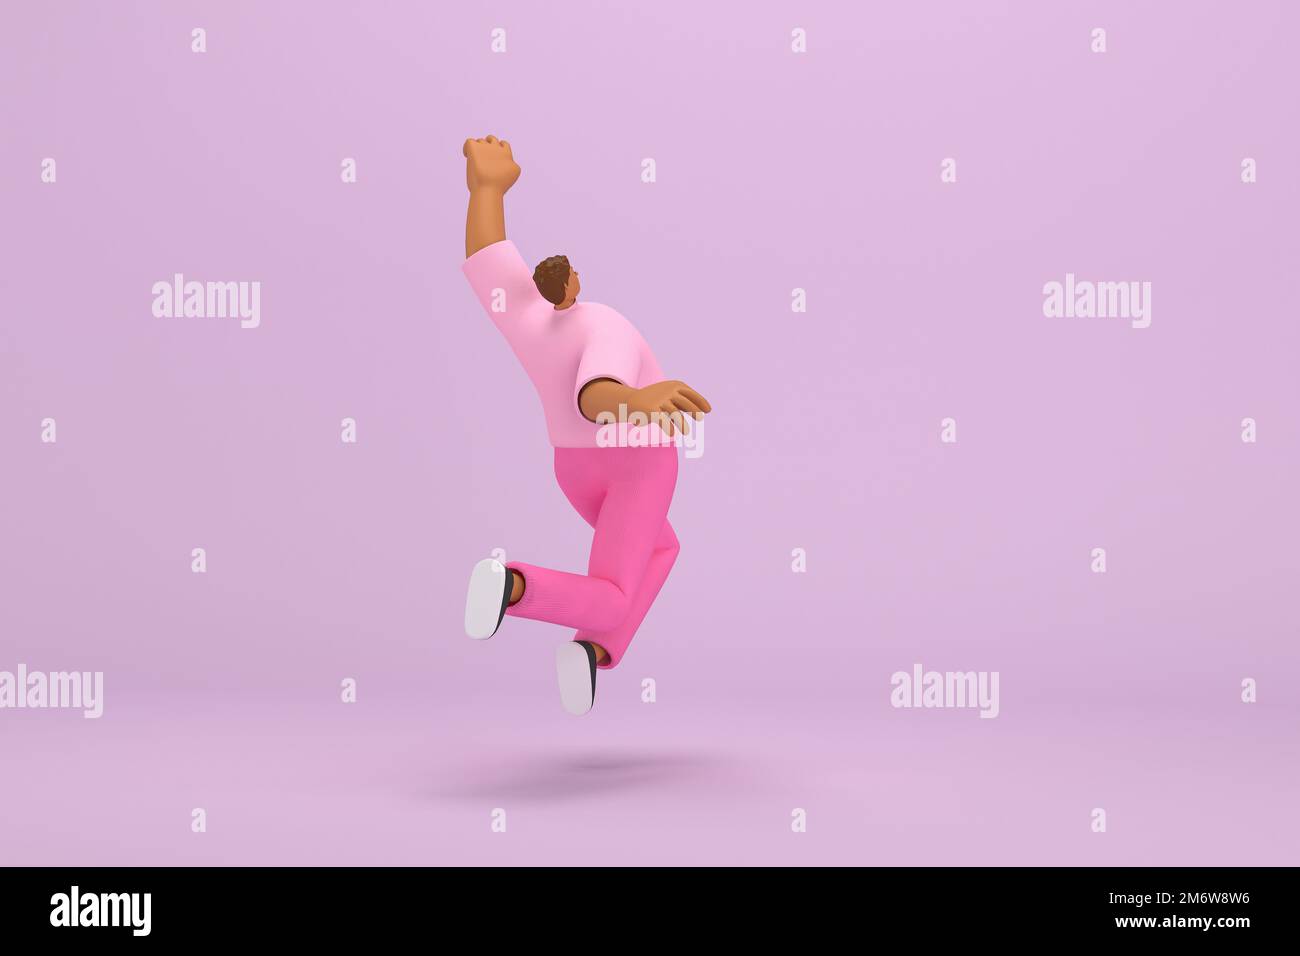 The black man with pink clothes.  He is jumping. 3d rendering of cartoon character in acting. Stock Photo